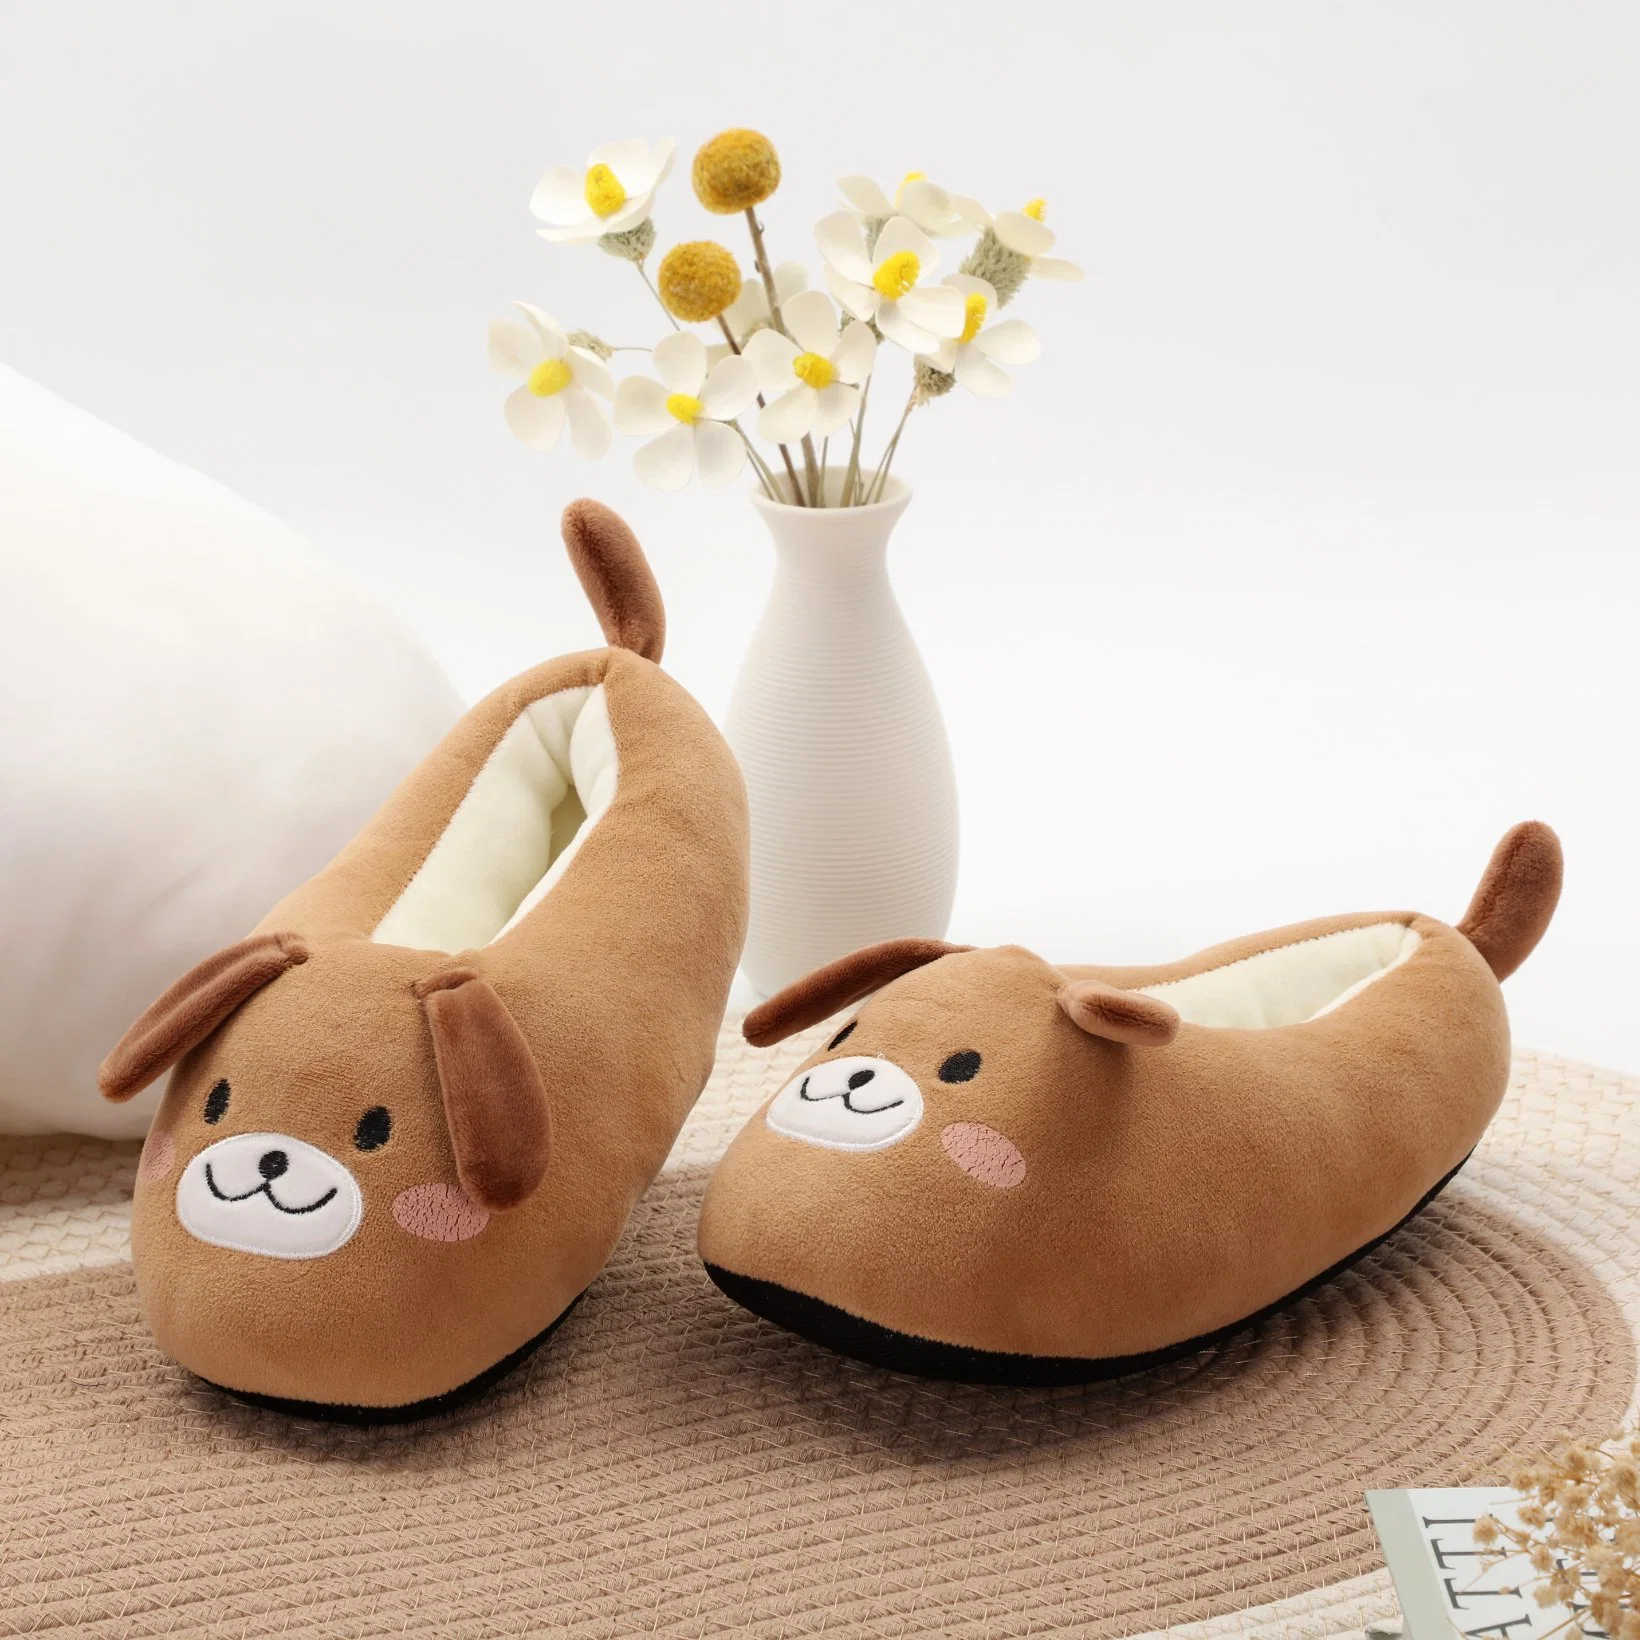 Winter Warm Home Slippers Women Shoes Cute Cartoon Indoor Plush Slipper Footwear Slippers for Adult